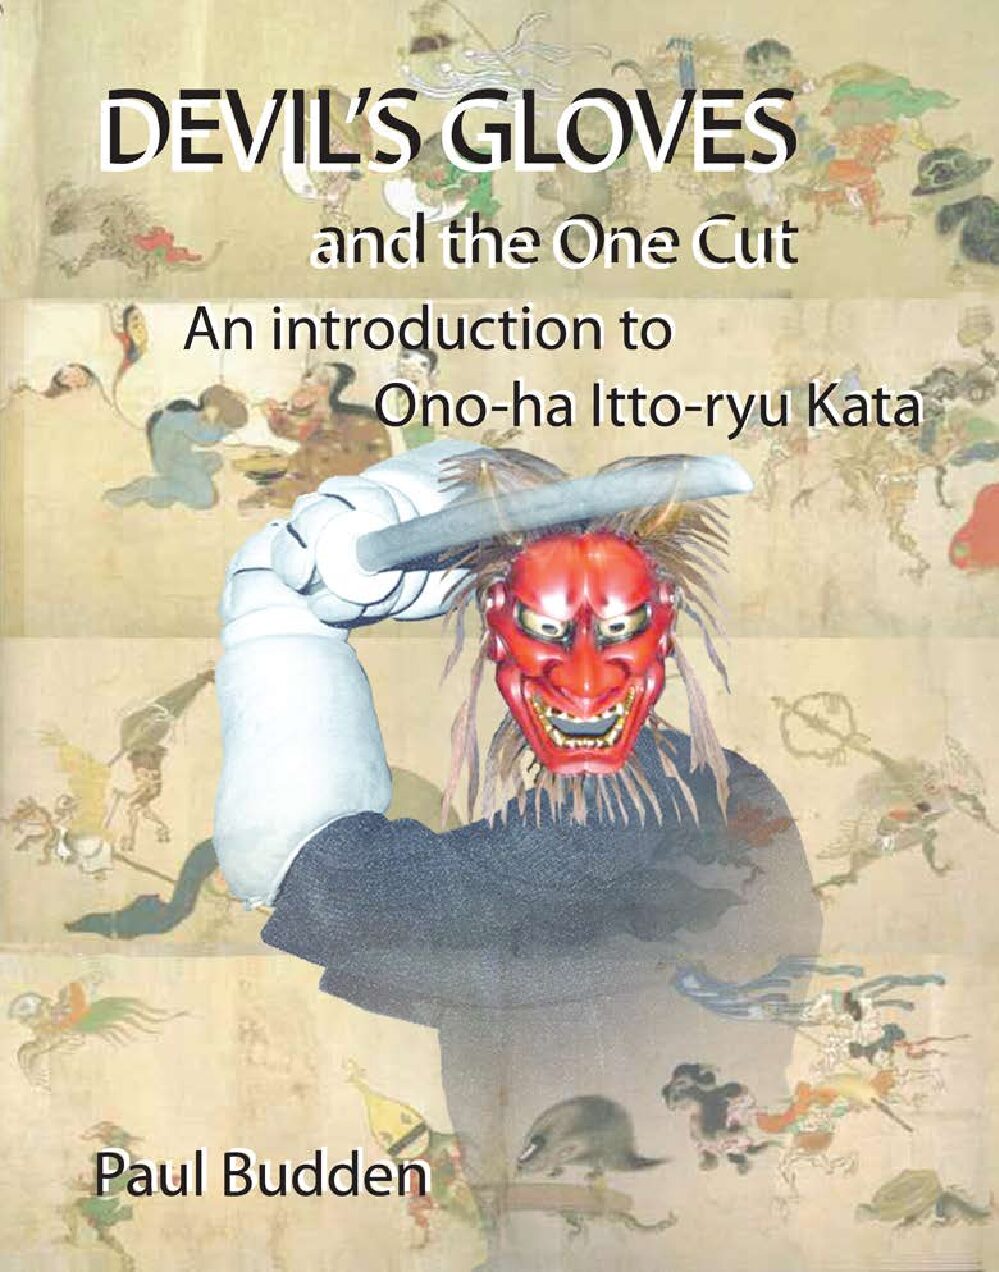 Devil’s Gloves and the One Cut: An Introduction to Ono-ha Itto-ryu Kata